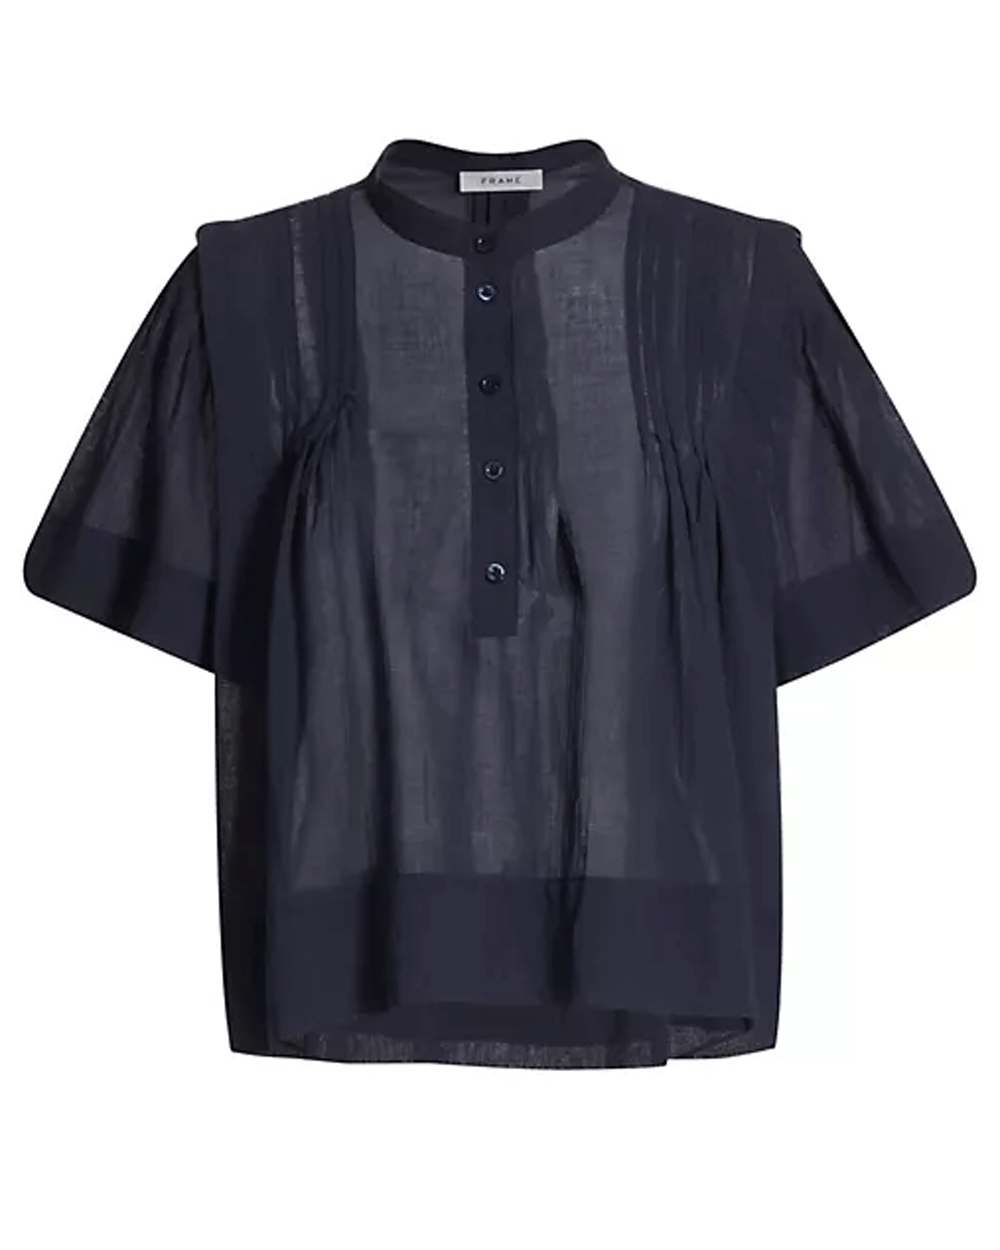 Pleated Button Up Blouse in Navy